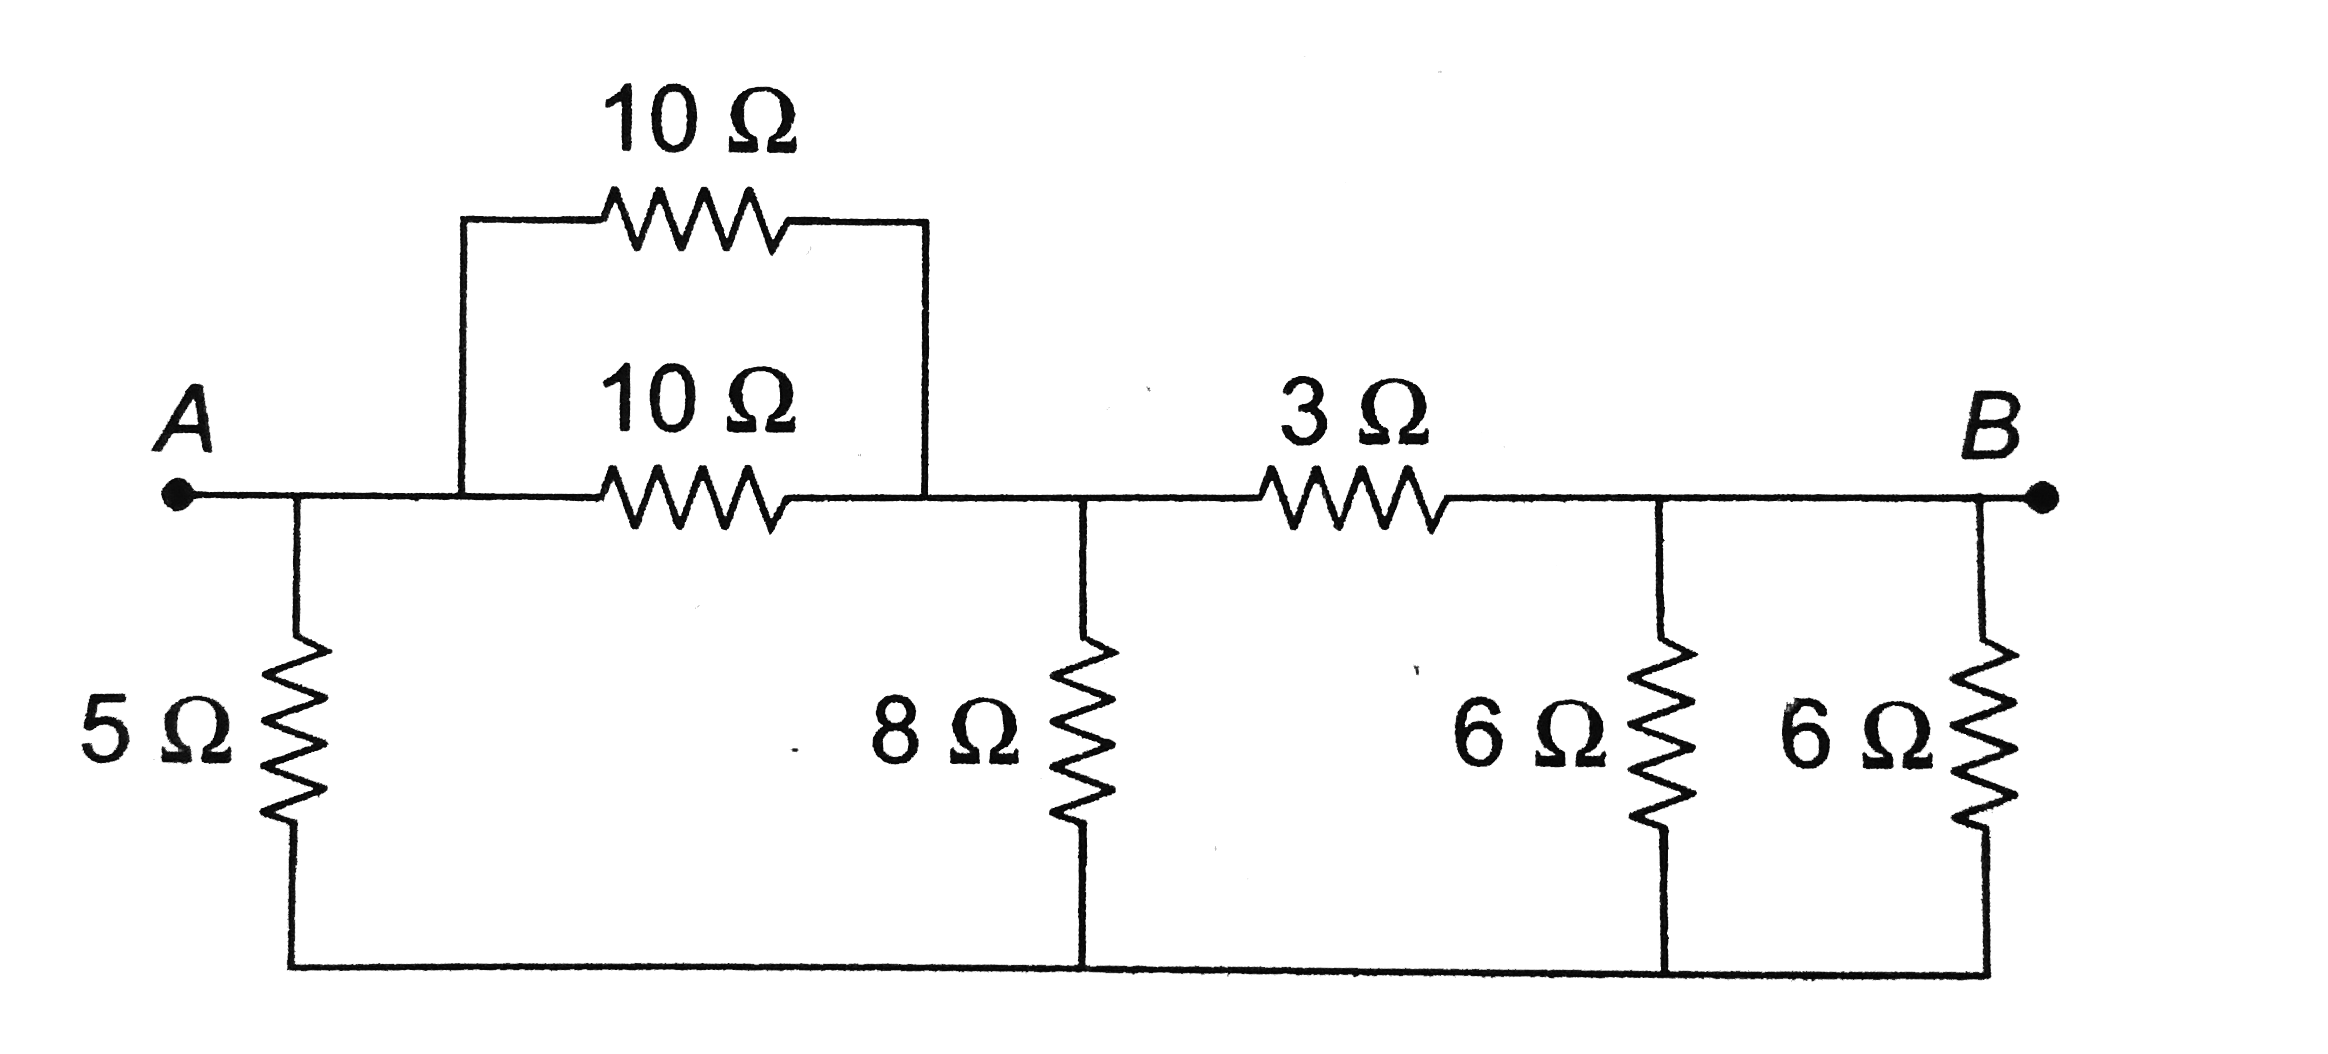 Seven resistance are connected as shown in the firgure. The equivalent resistance between A and B is approximately